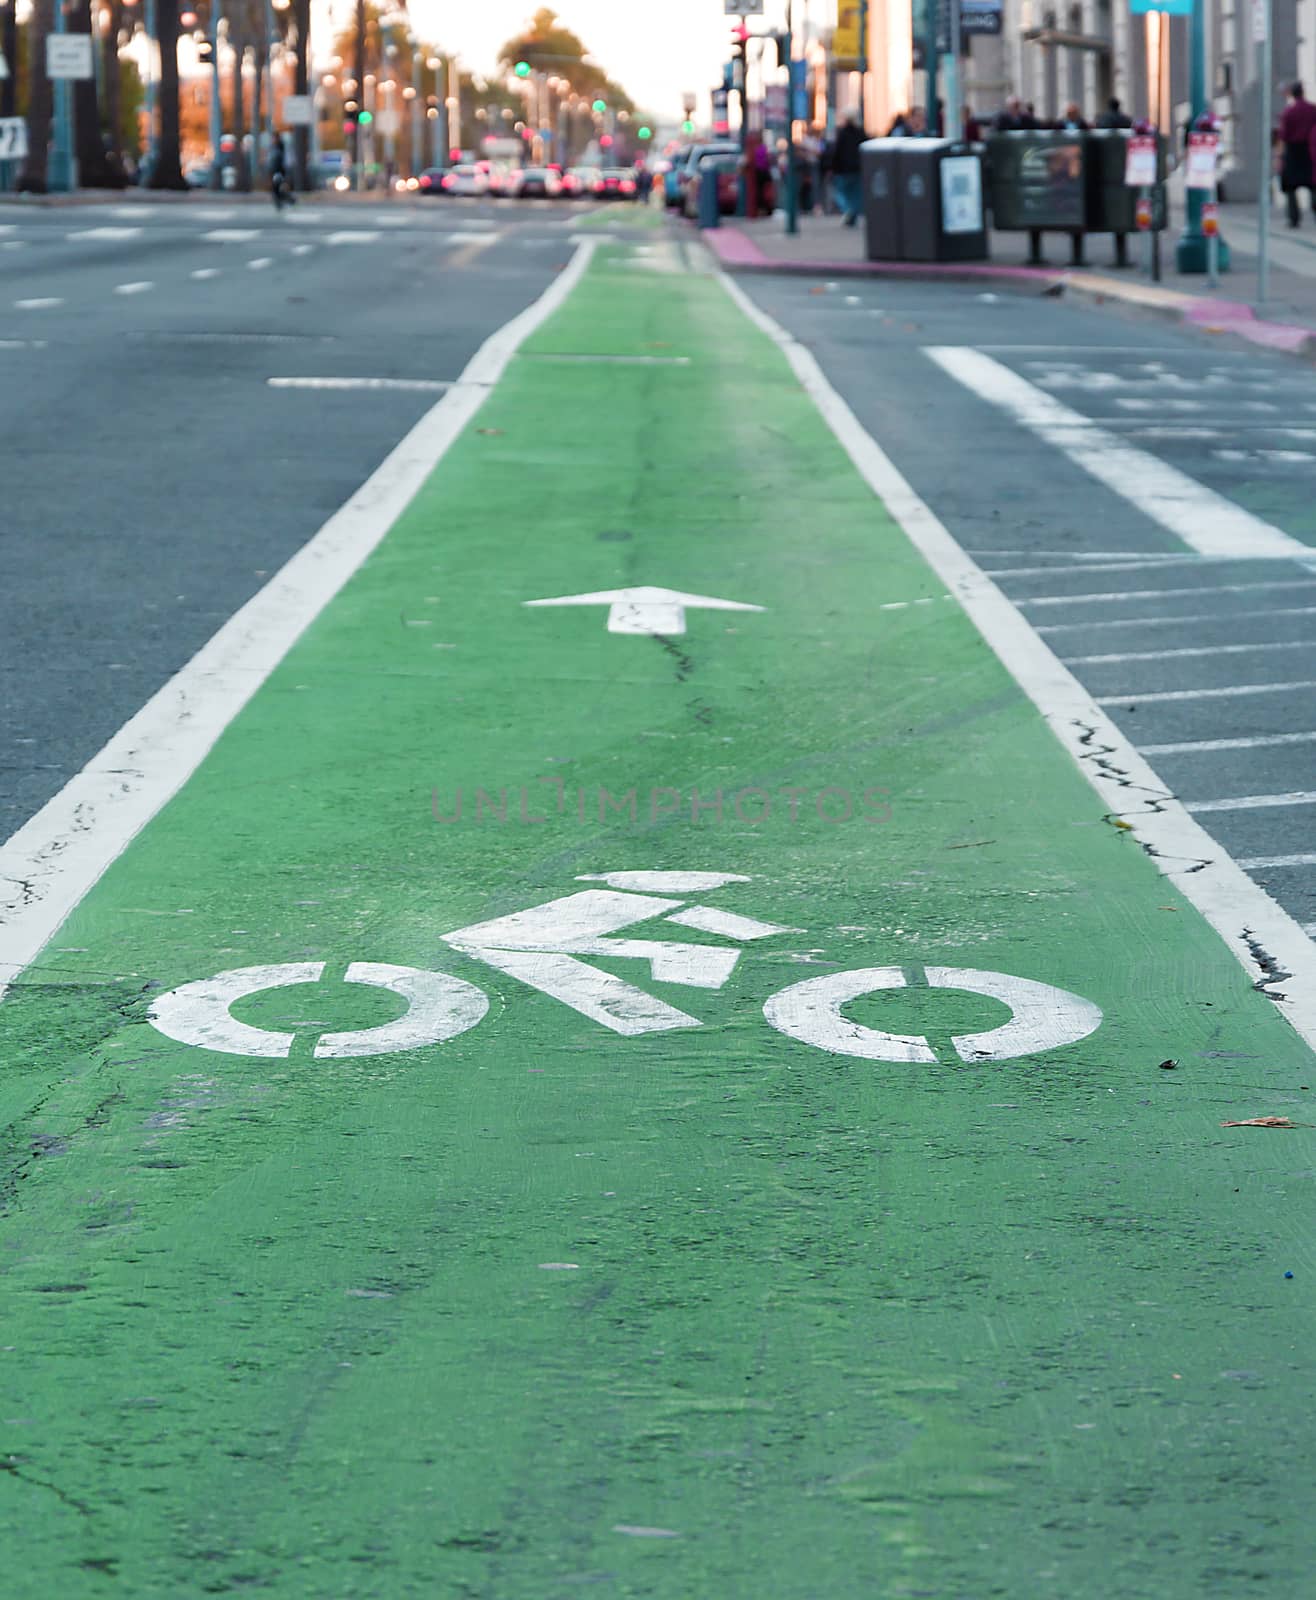 bike lane painted in green and traffic jam in background